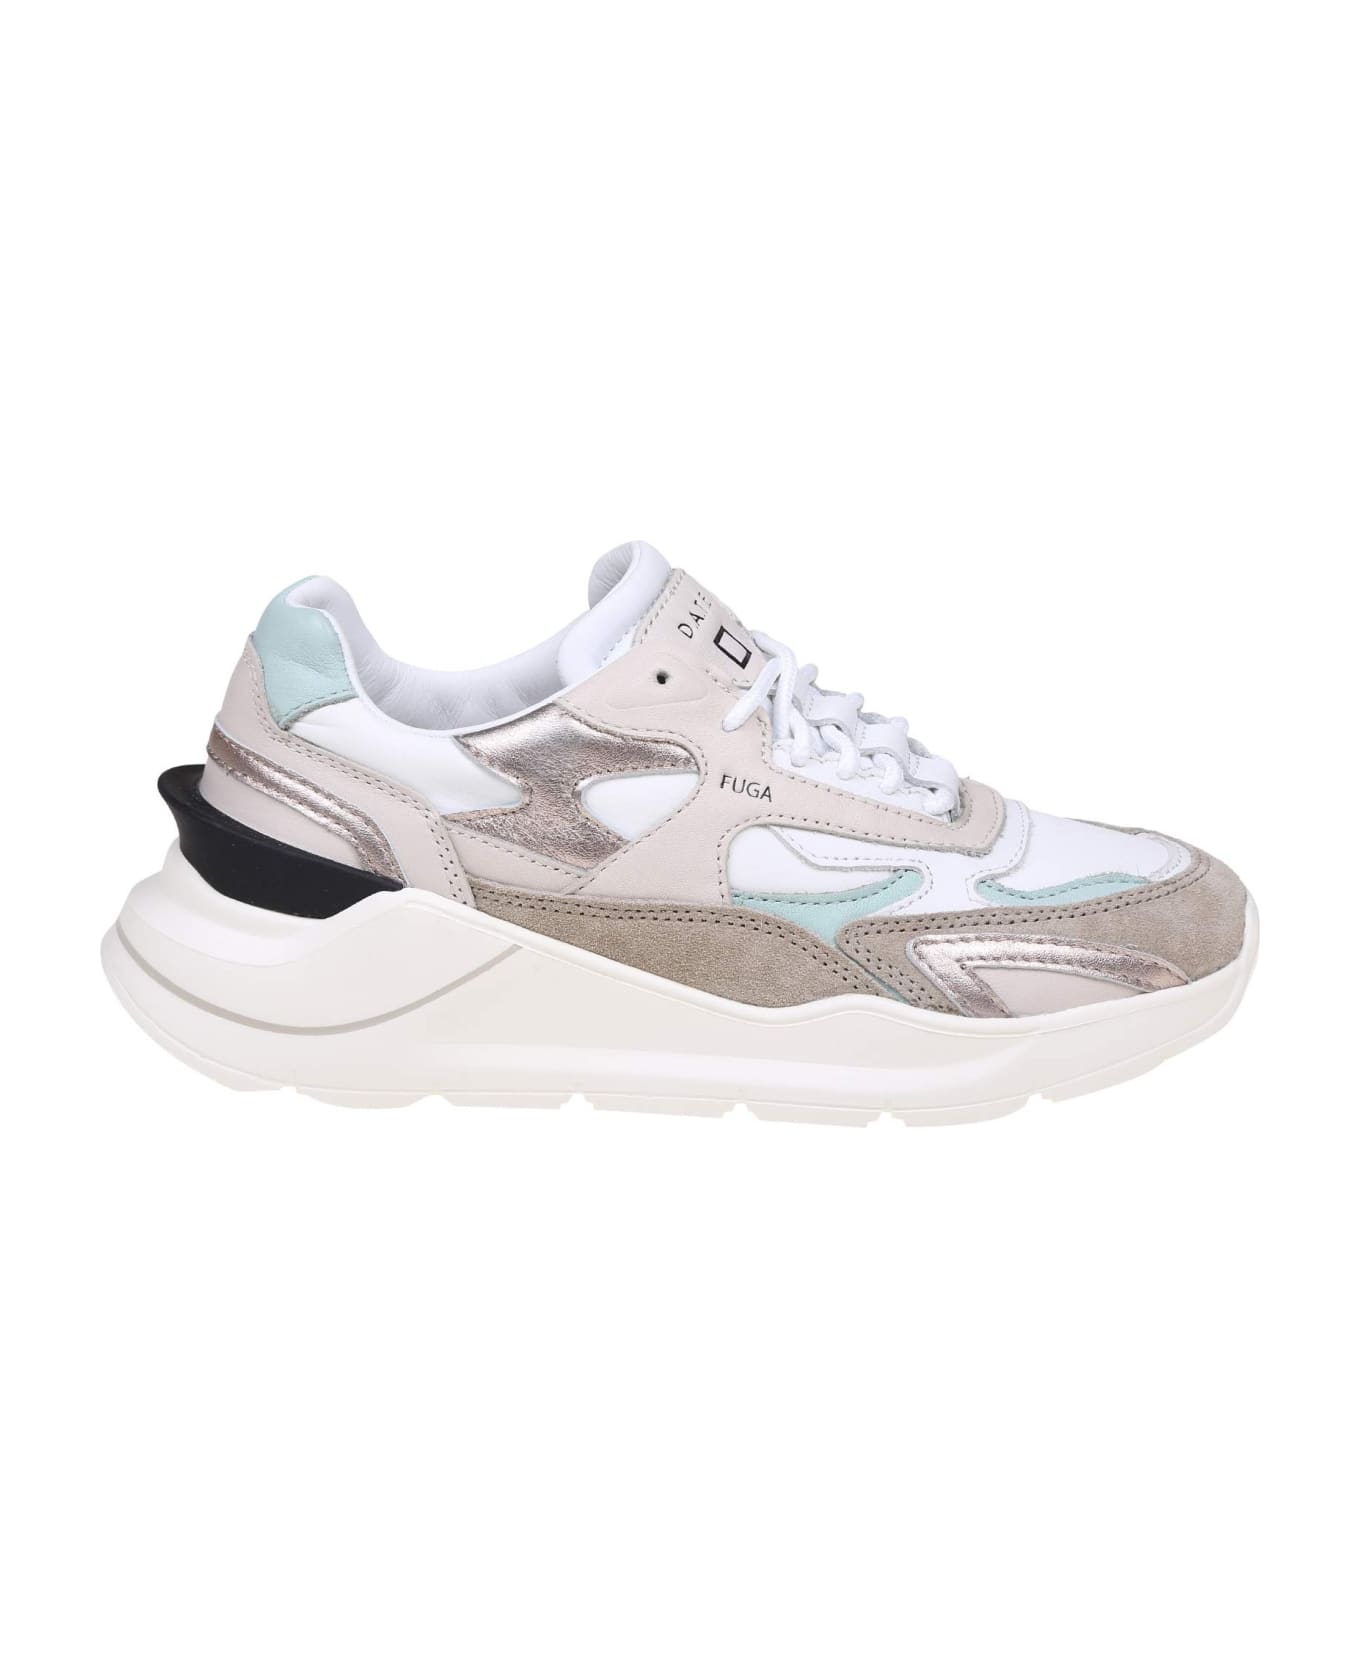 D.A.T.E. Fuga Sneakers In White/ Cream Leather And Suede - Cream スニーカー